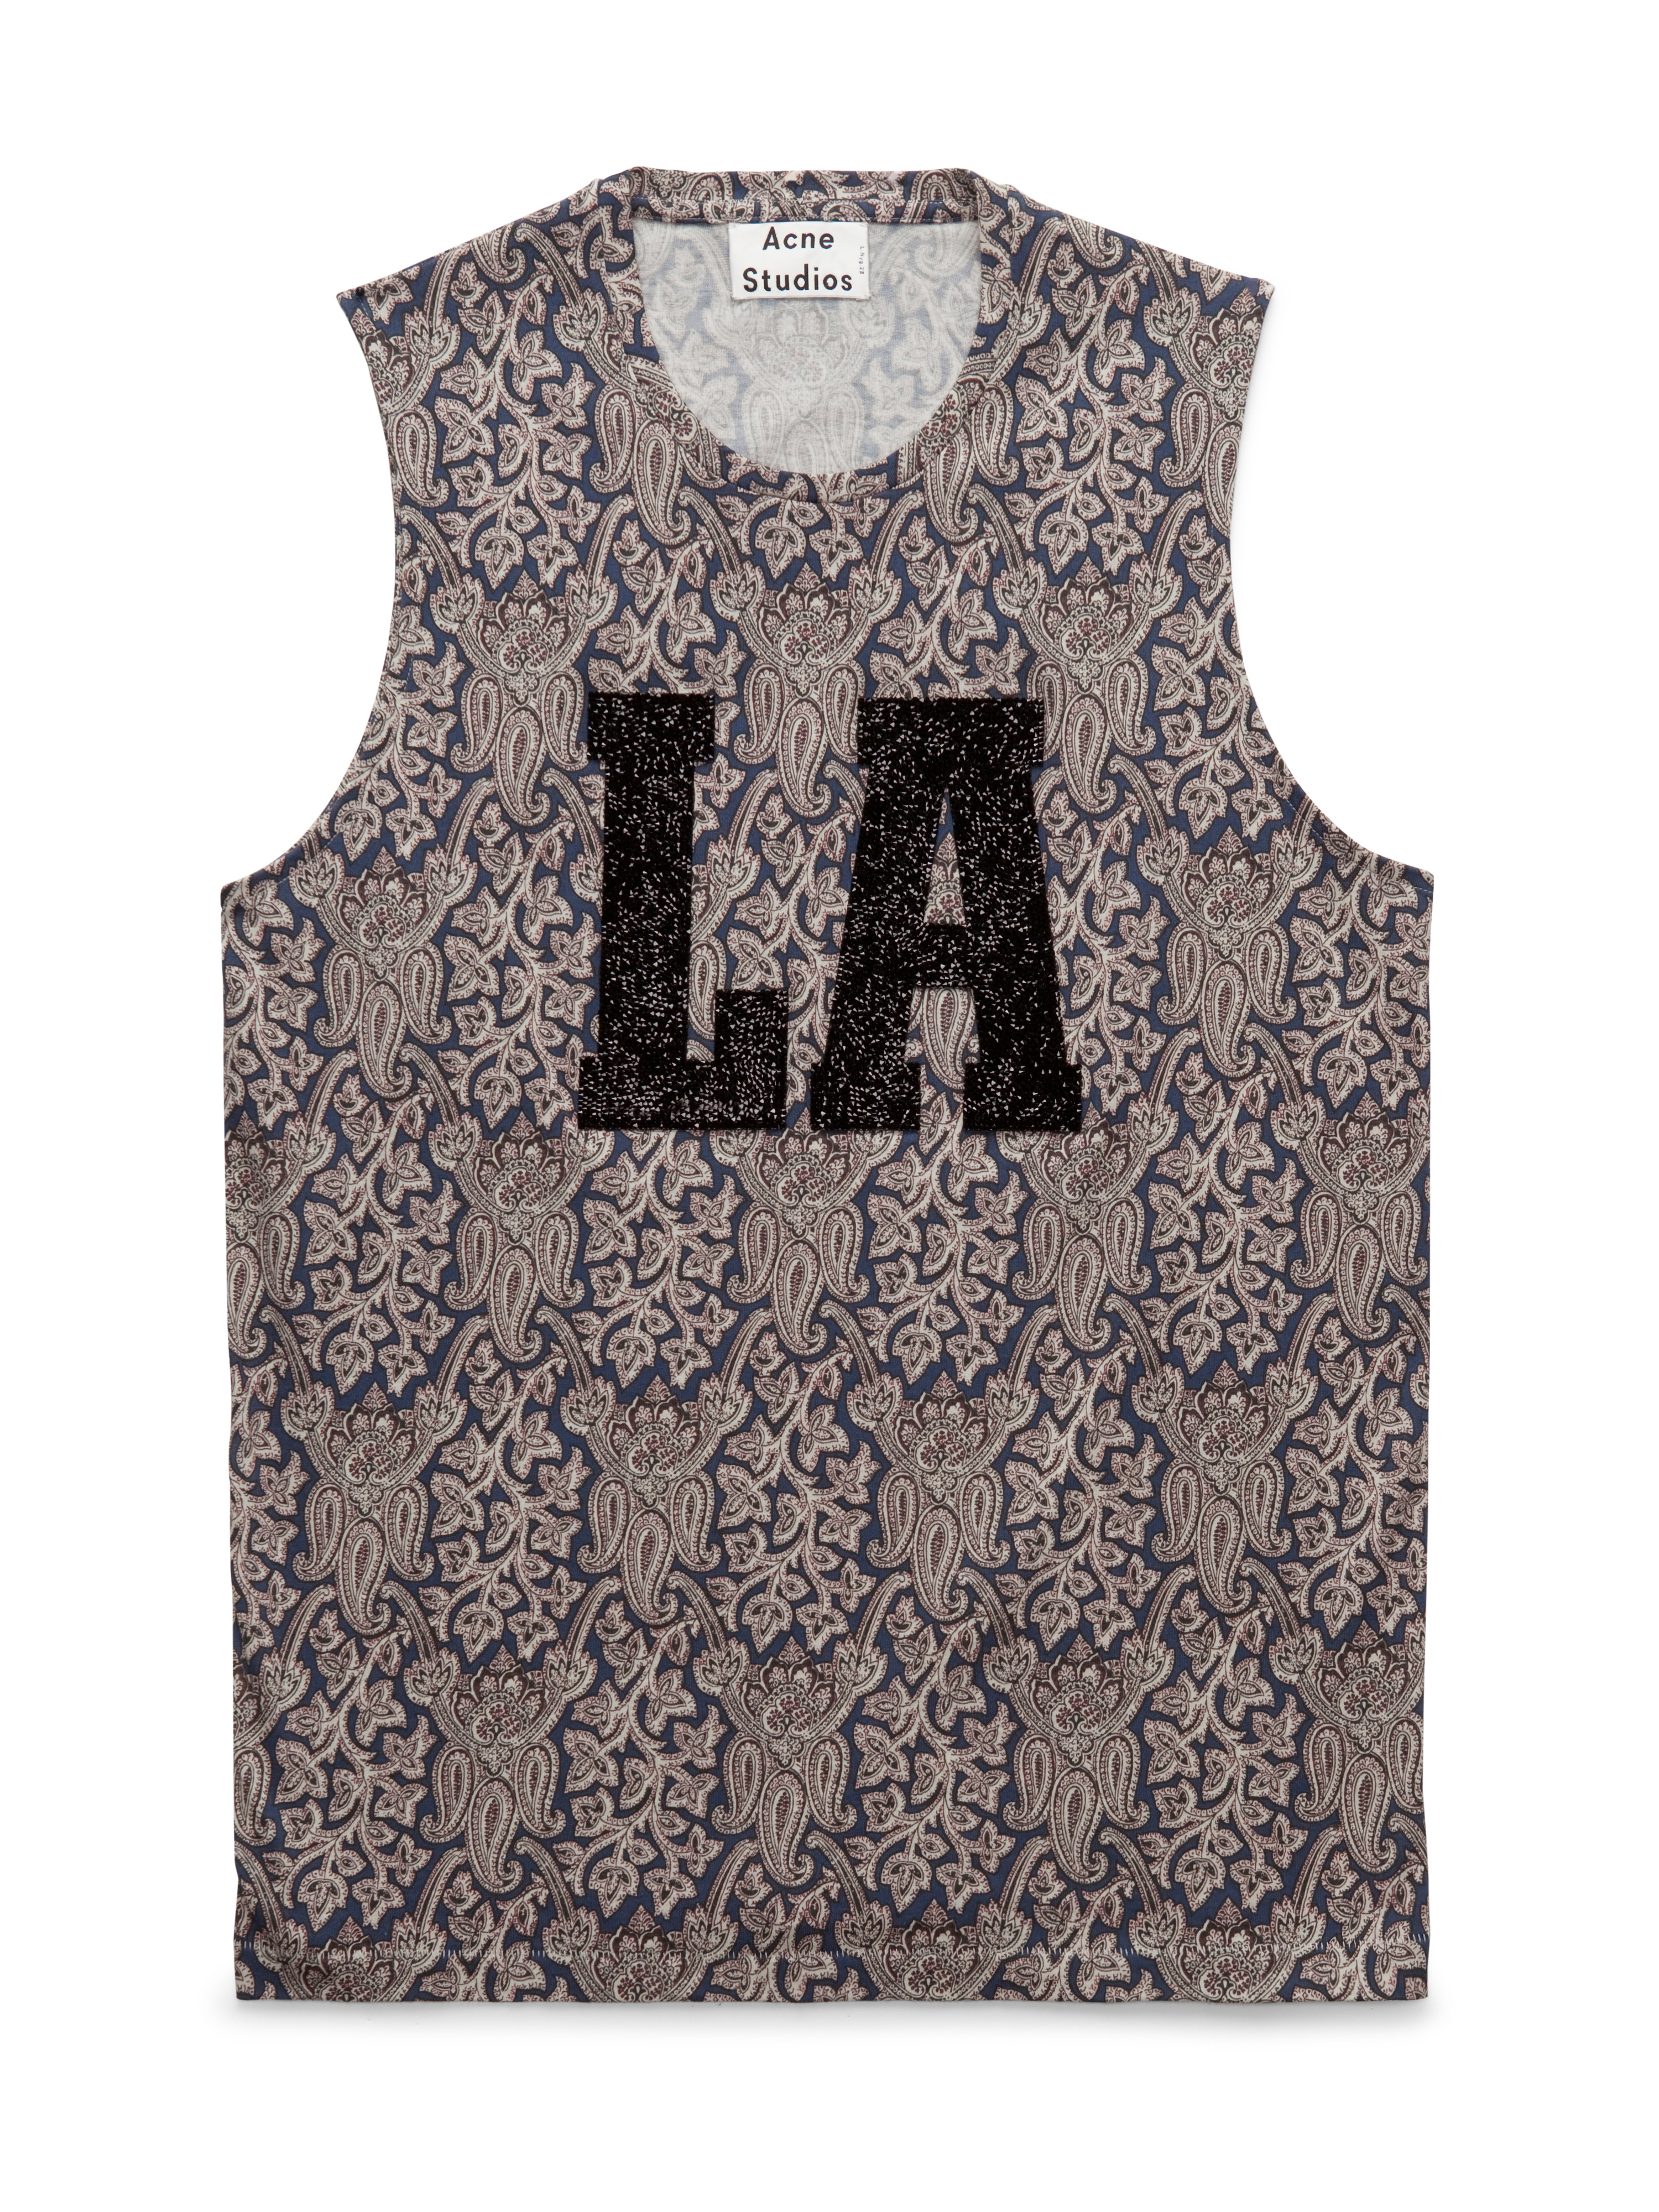 Acne Studios and Liberty collaboration zone blue paisley tank top.jpg